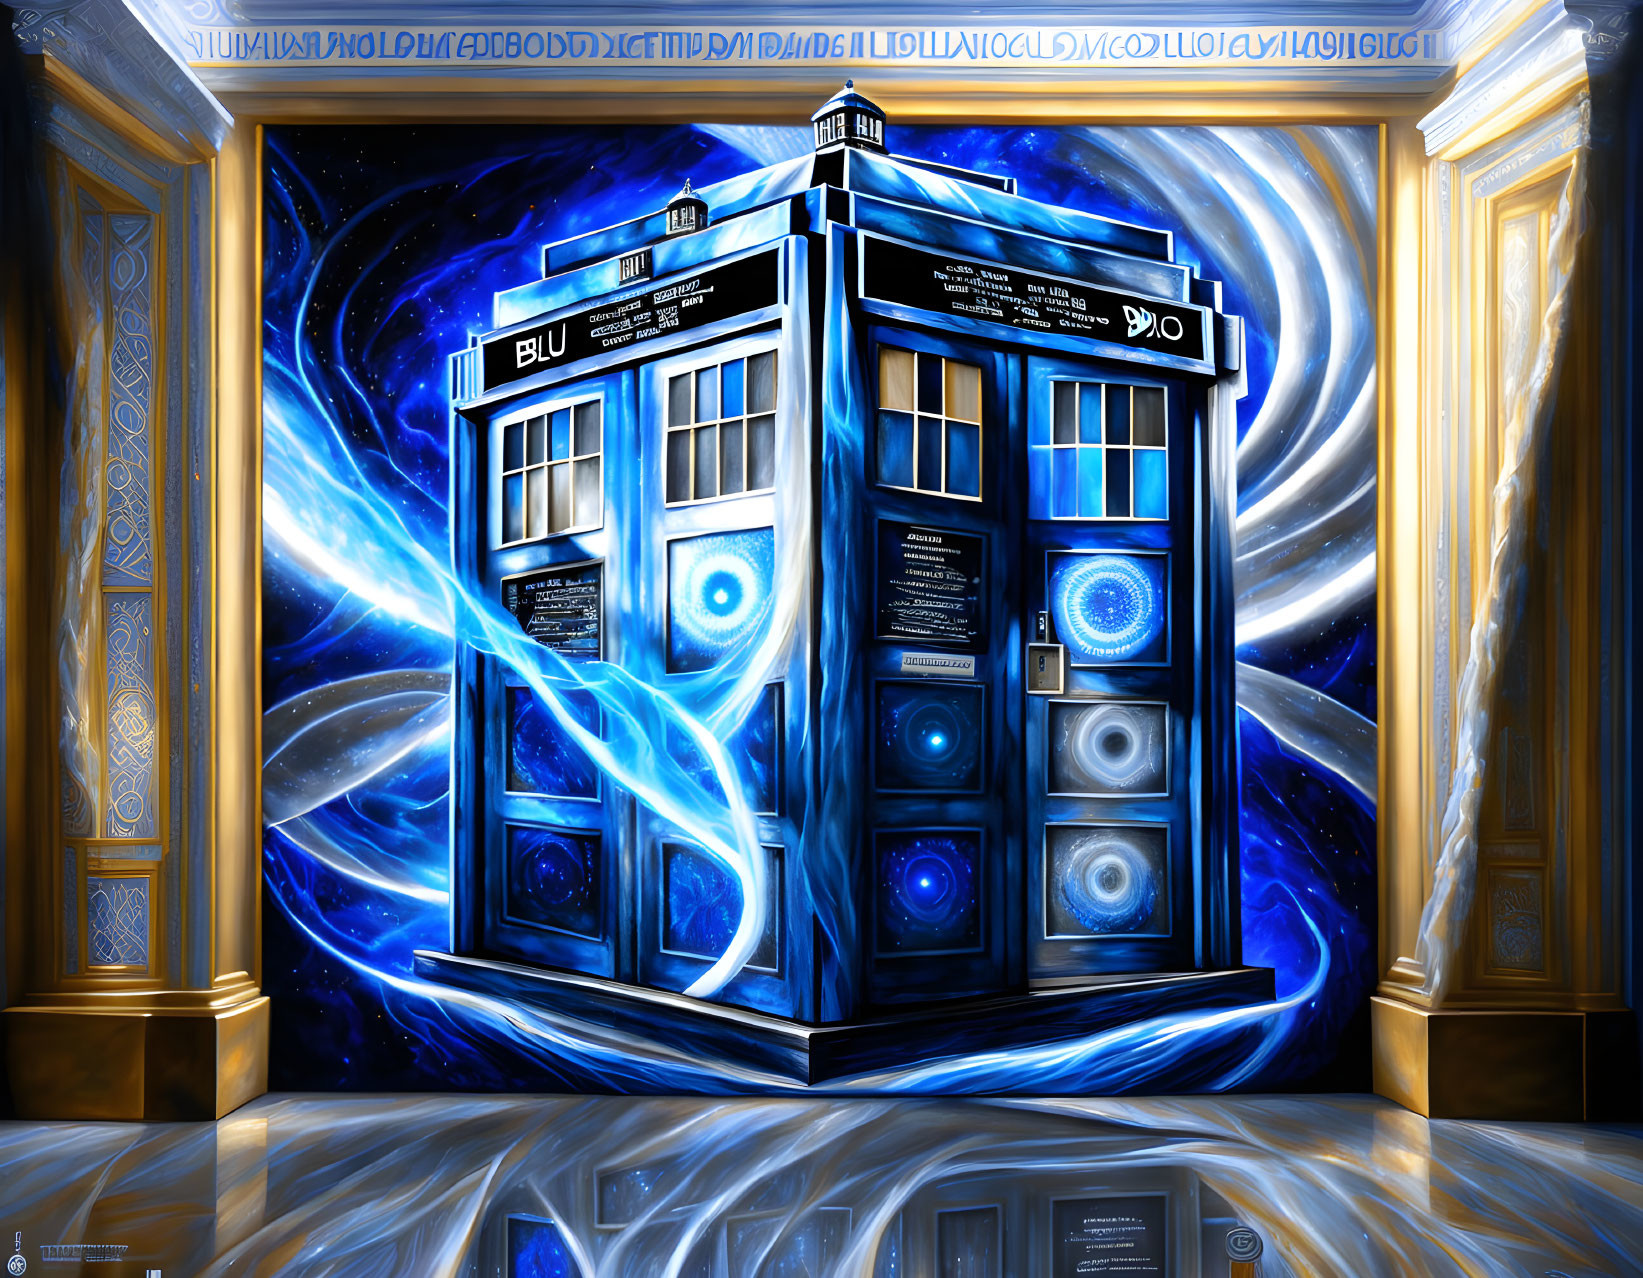 Vibrant painting: Blue police box in surreal room